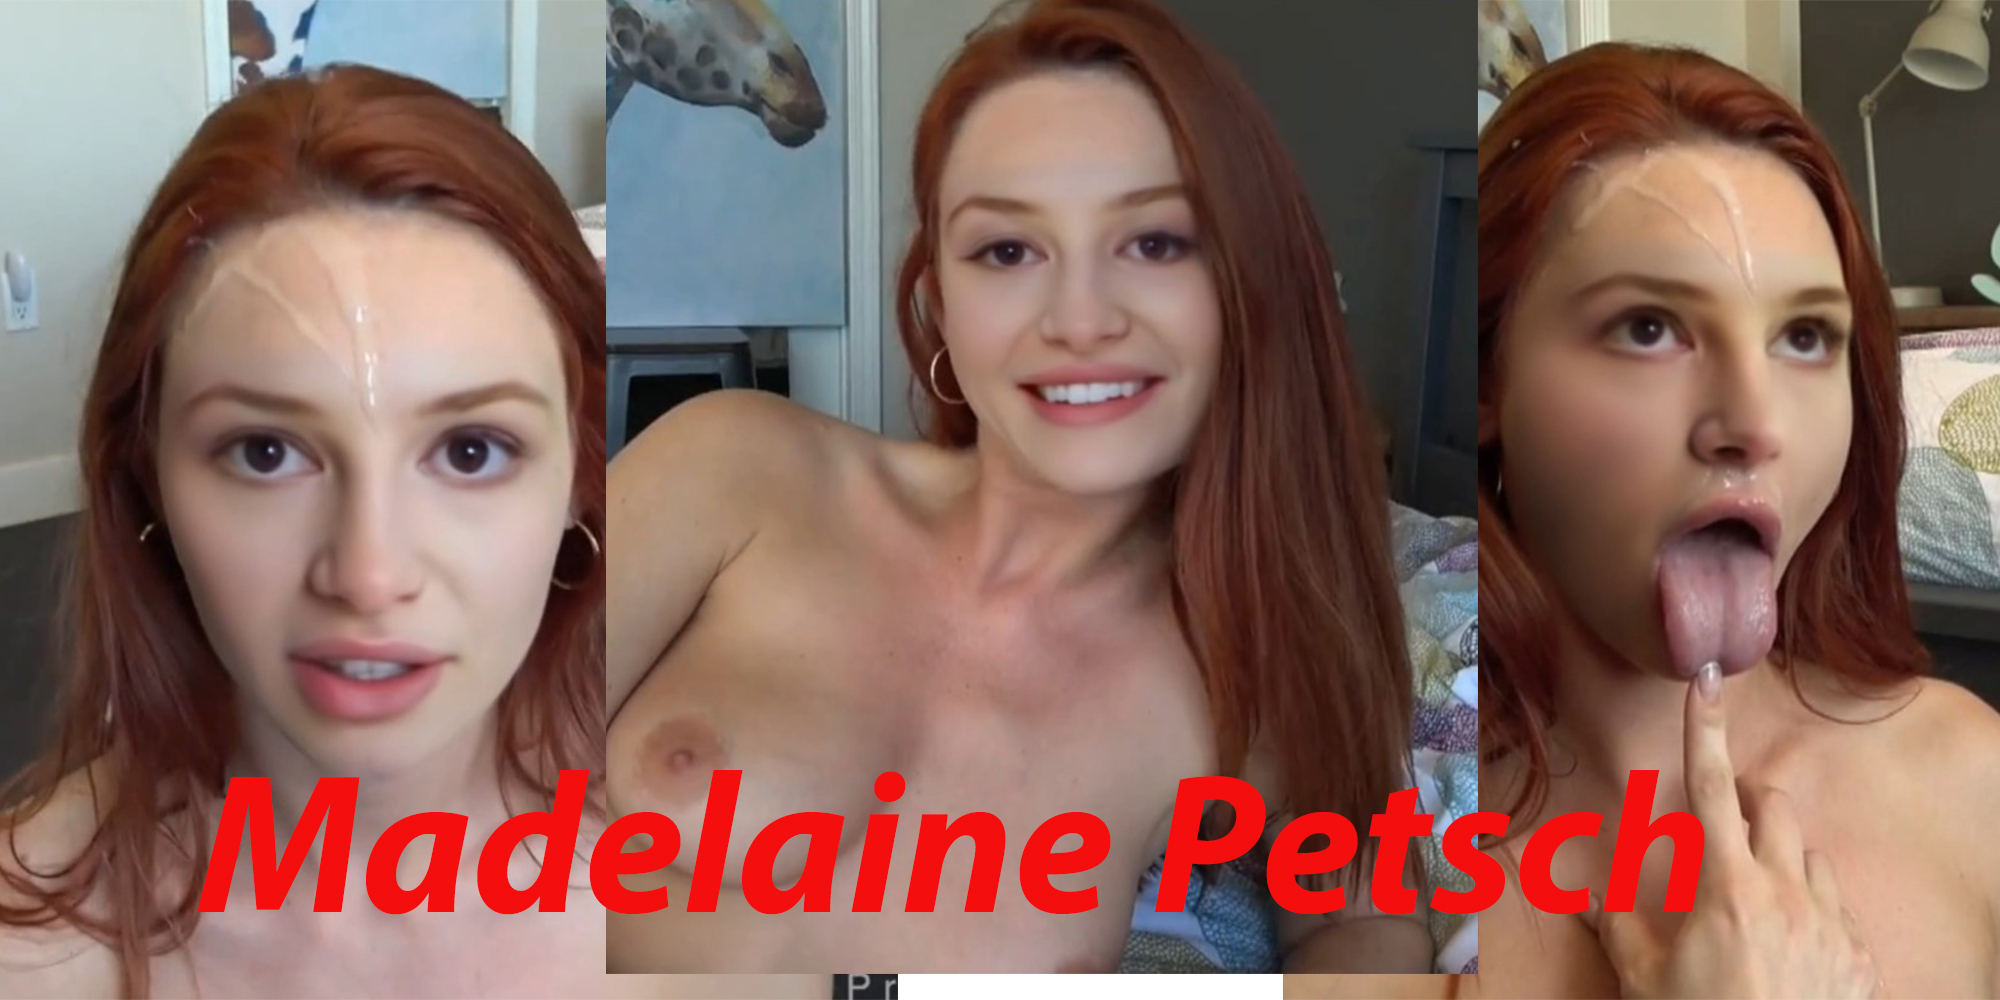 Madelaine Petsch let's talk and fuck